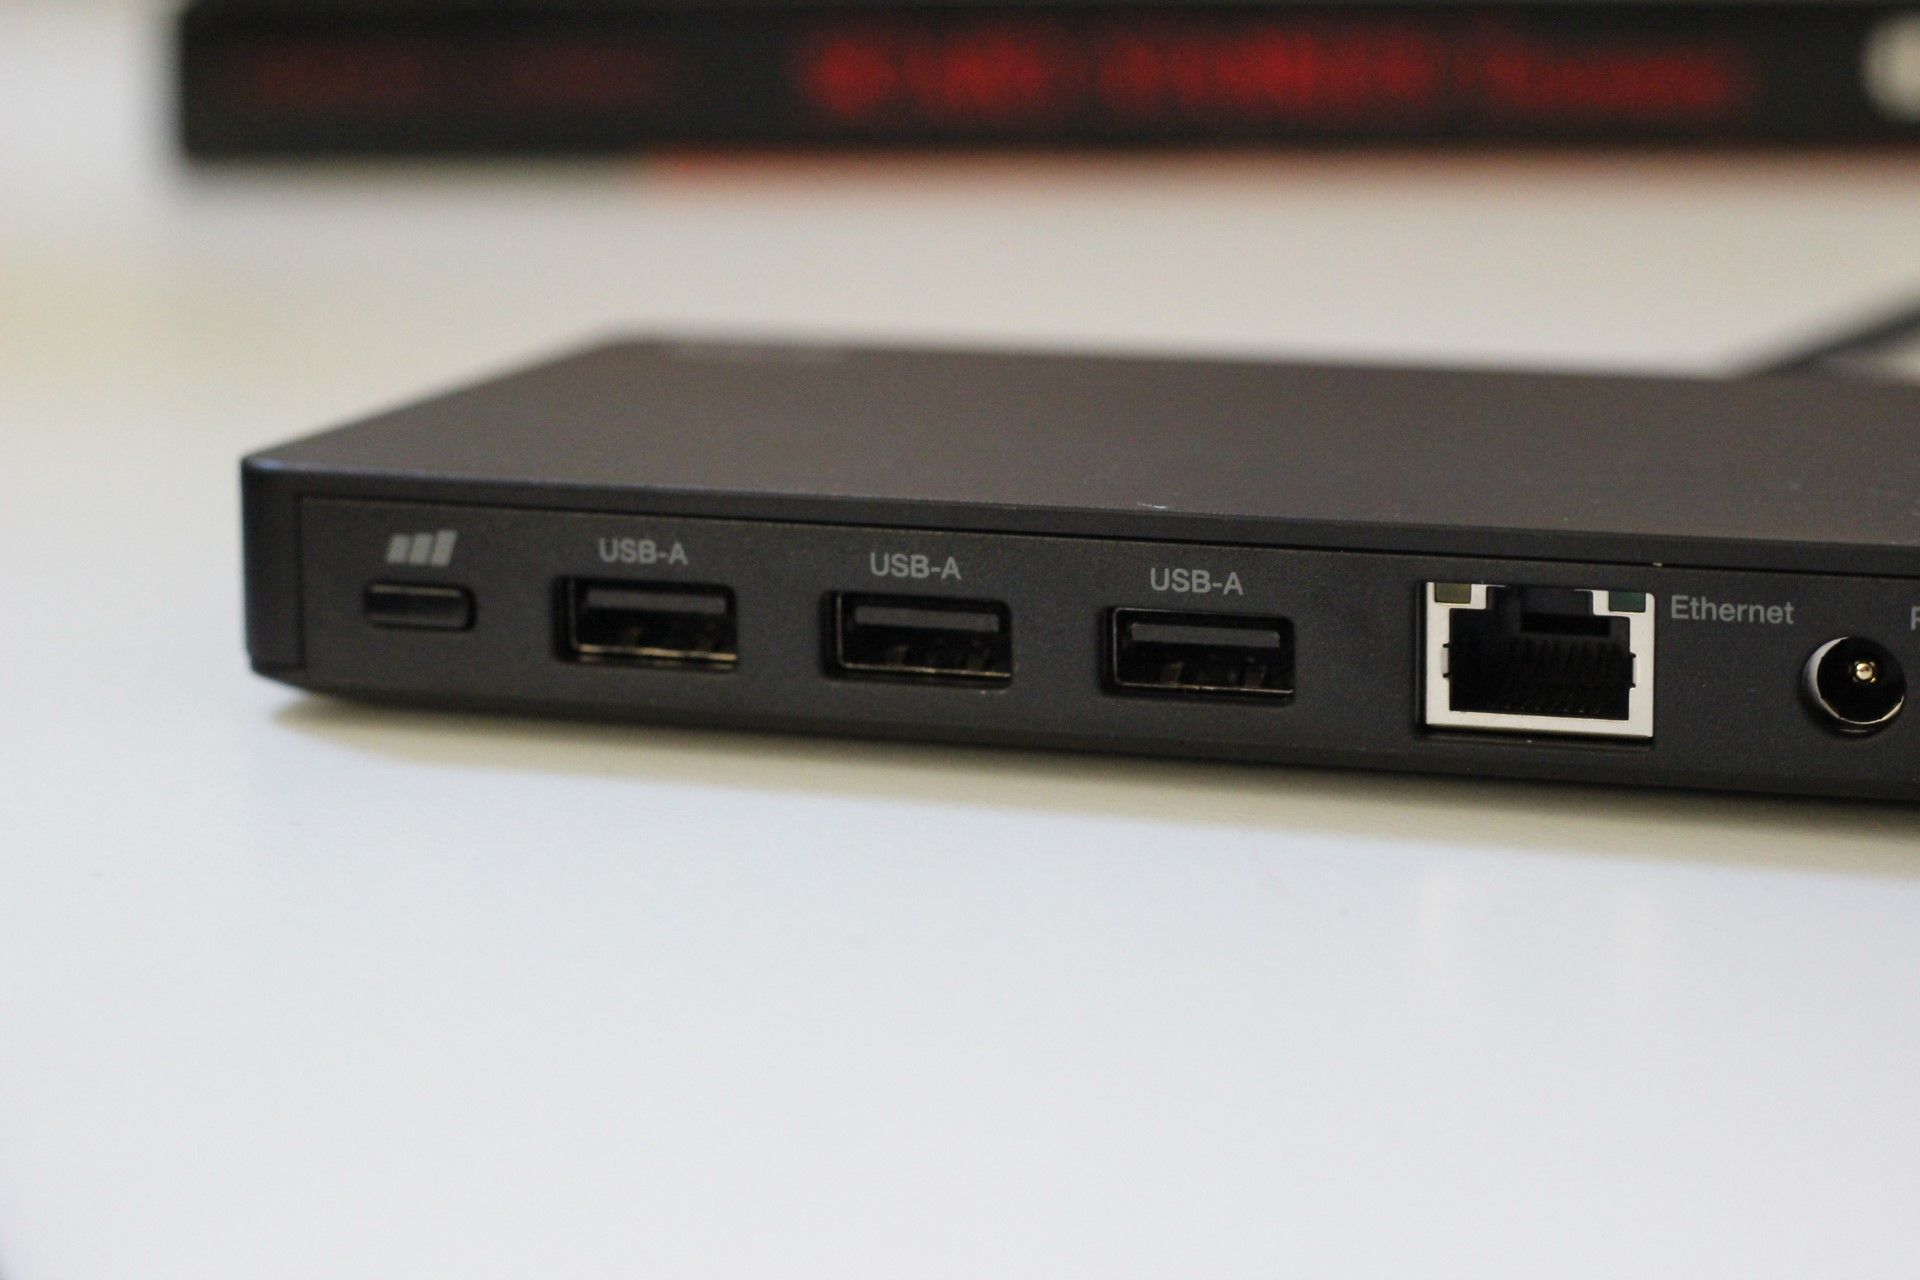 The USB-A ports on the Cyber Acoustics DS-2000 Essential Dock